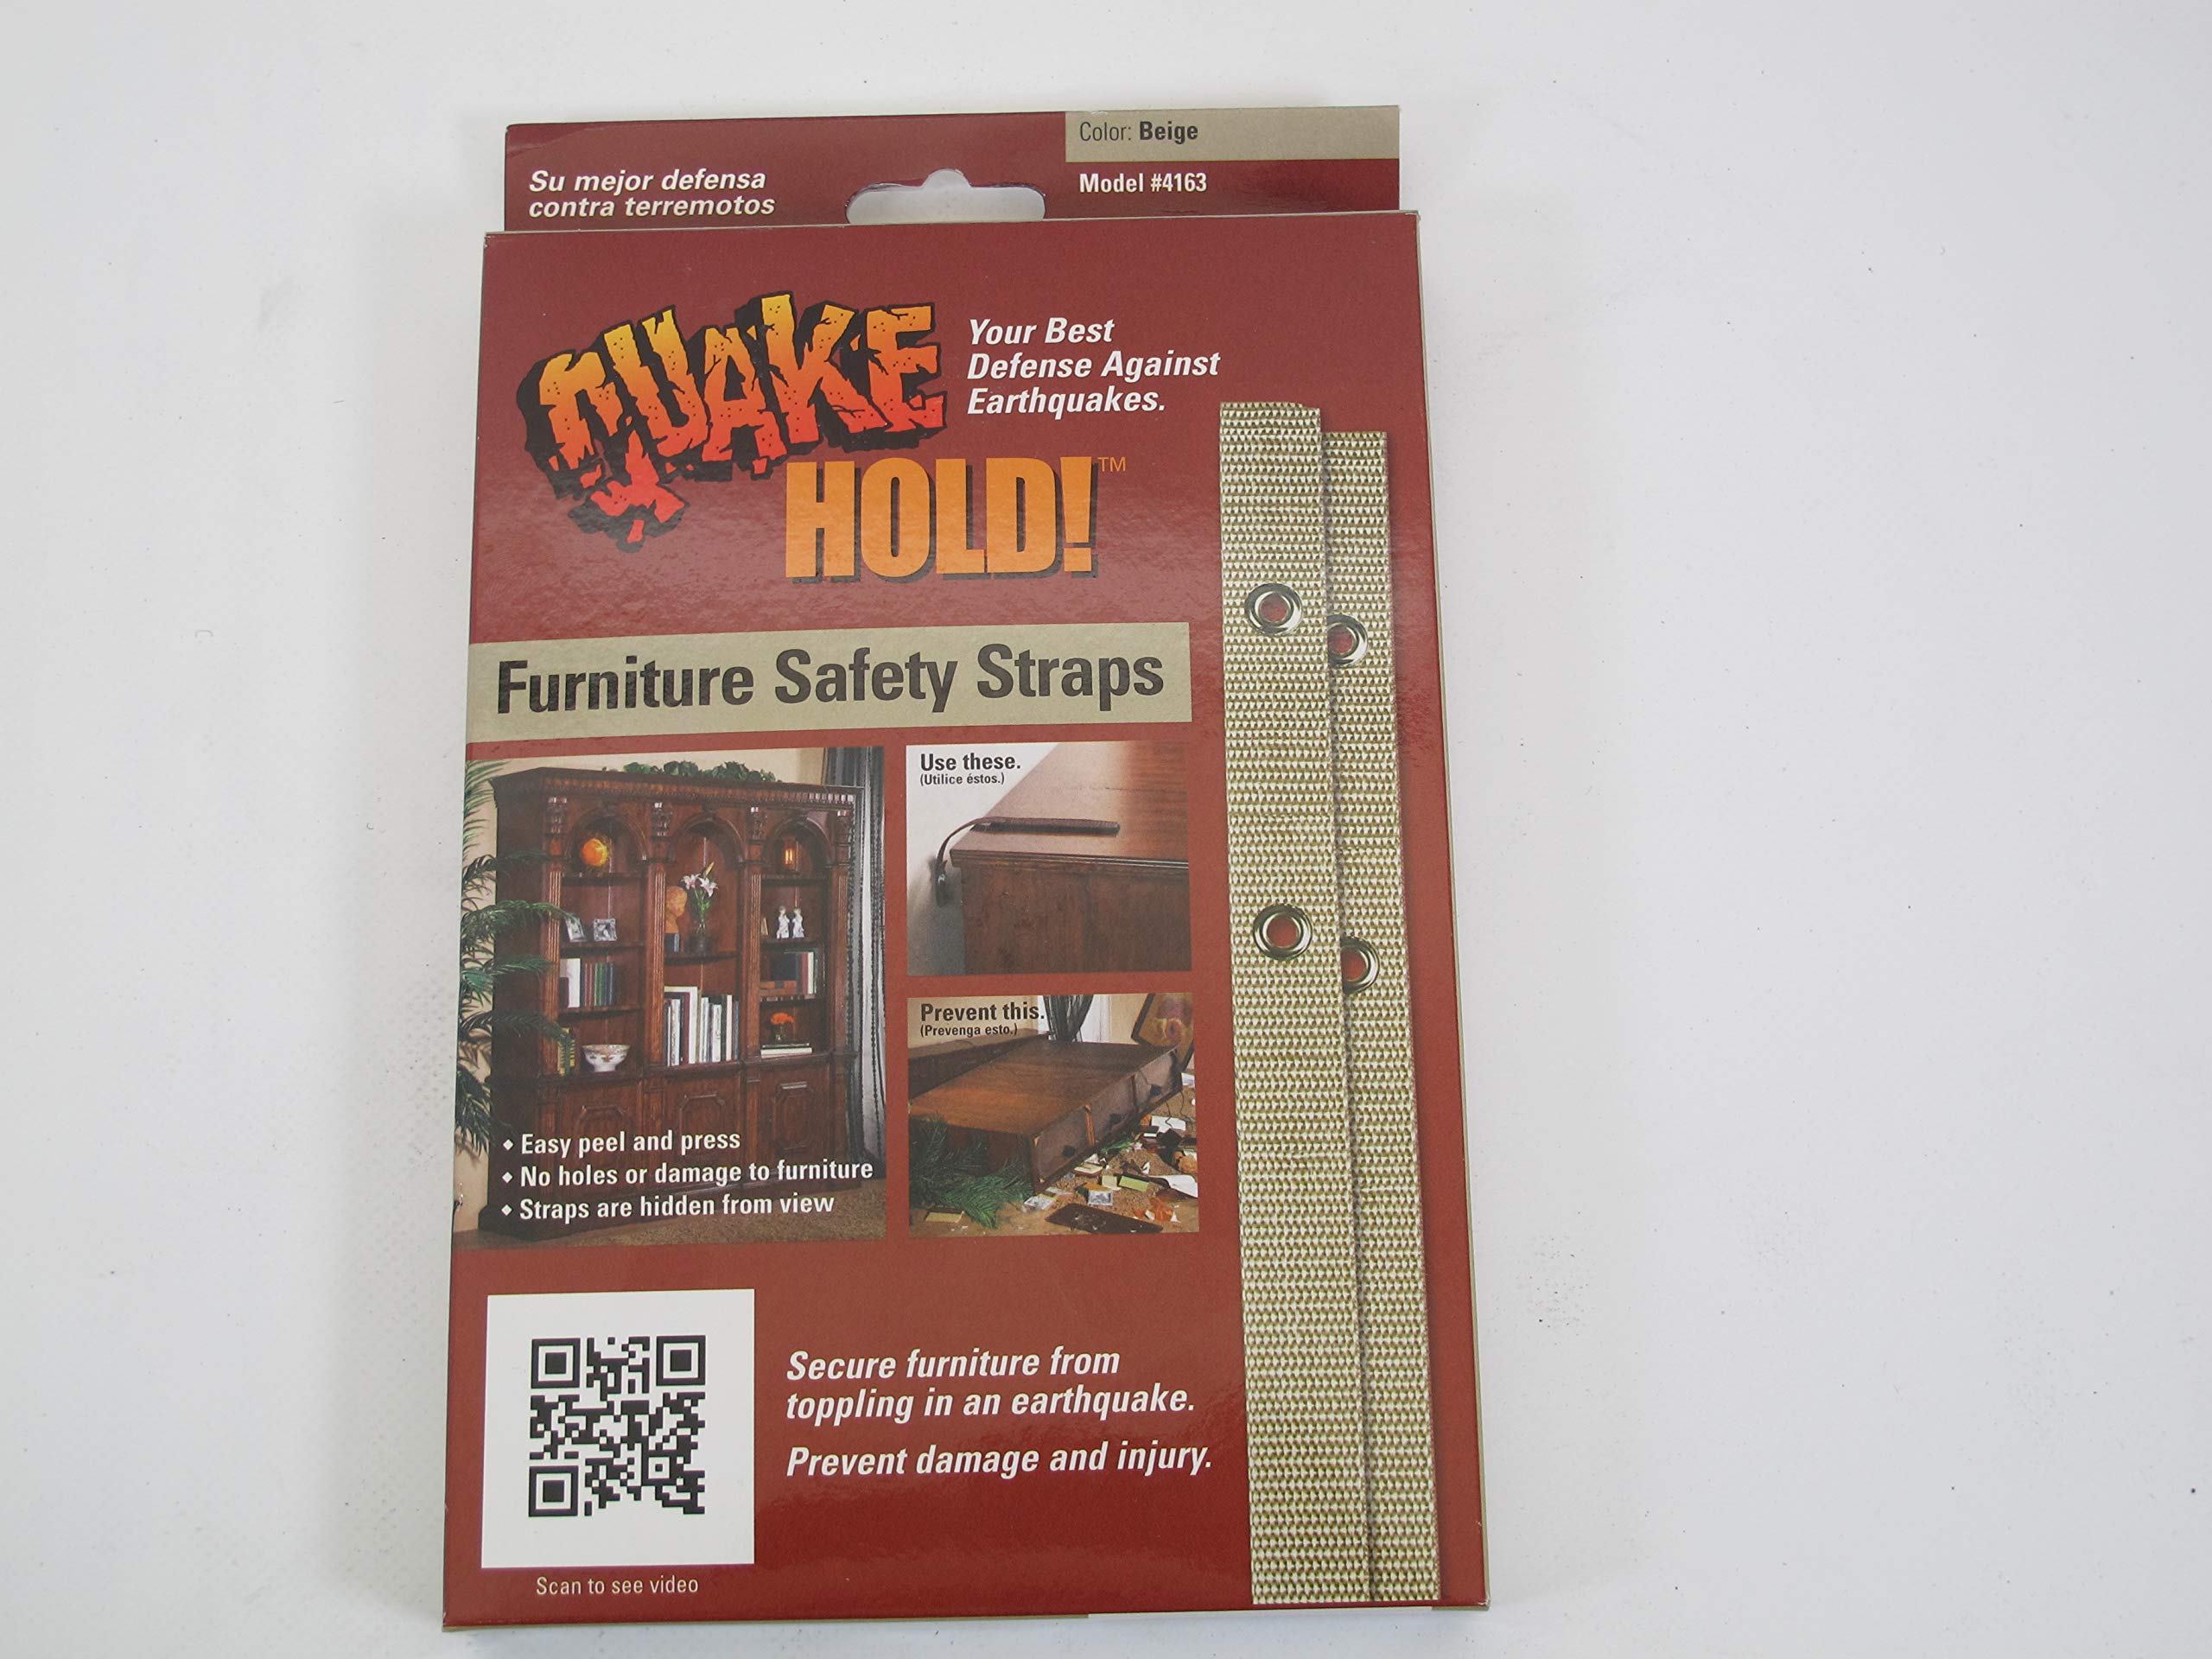 Quakehold! Furniture Strap Kit, Earthquake Fasteners for Disaster Preparedness, Child Proof Safety Straps for RV, Home Office, Helps Prevent Damage and Injury, Easy to Install, Beige